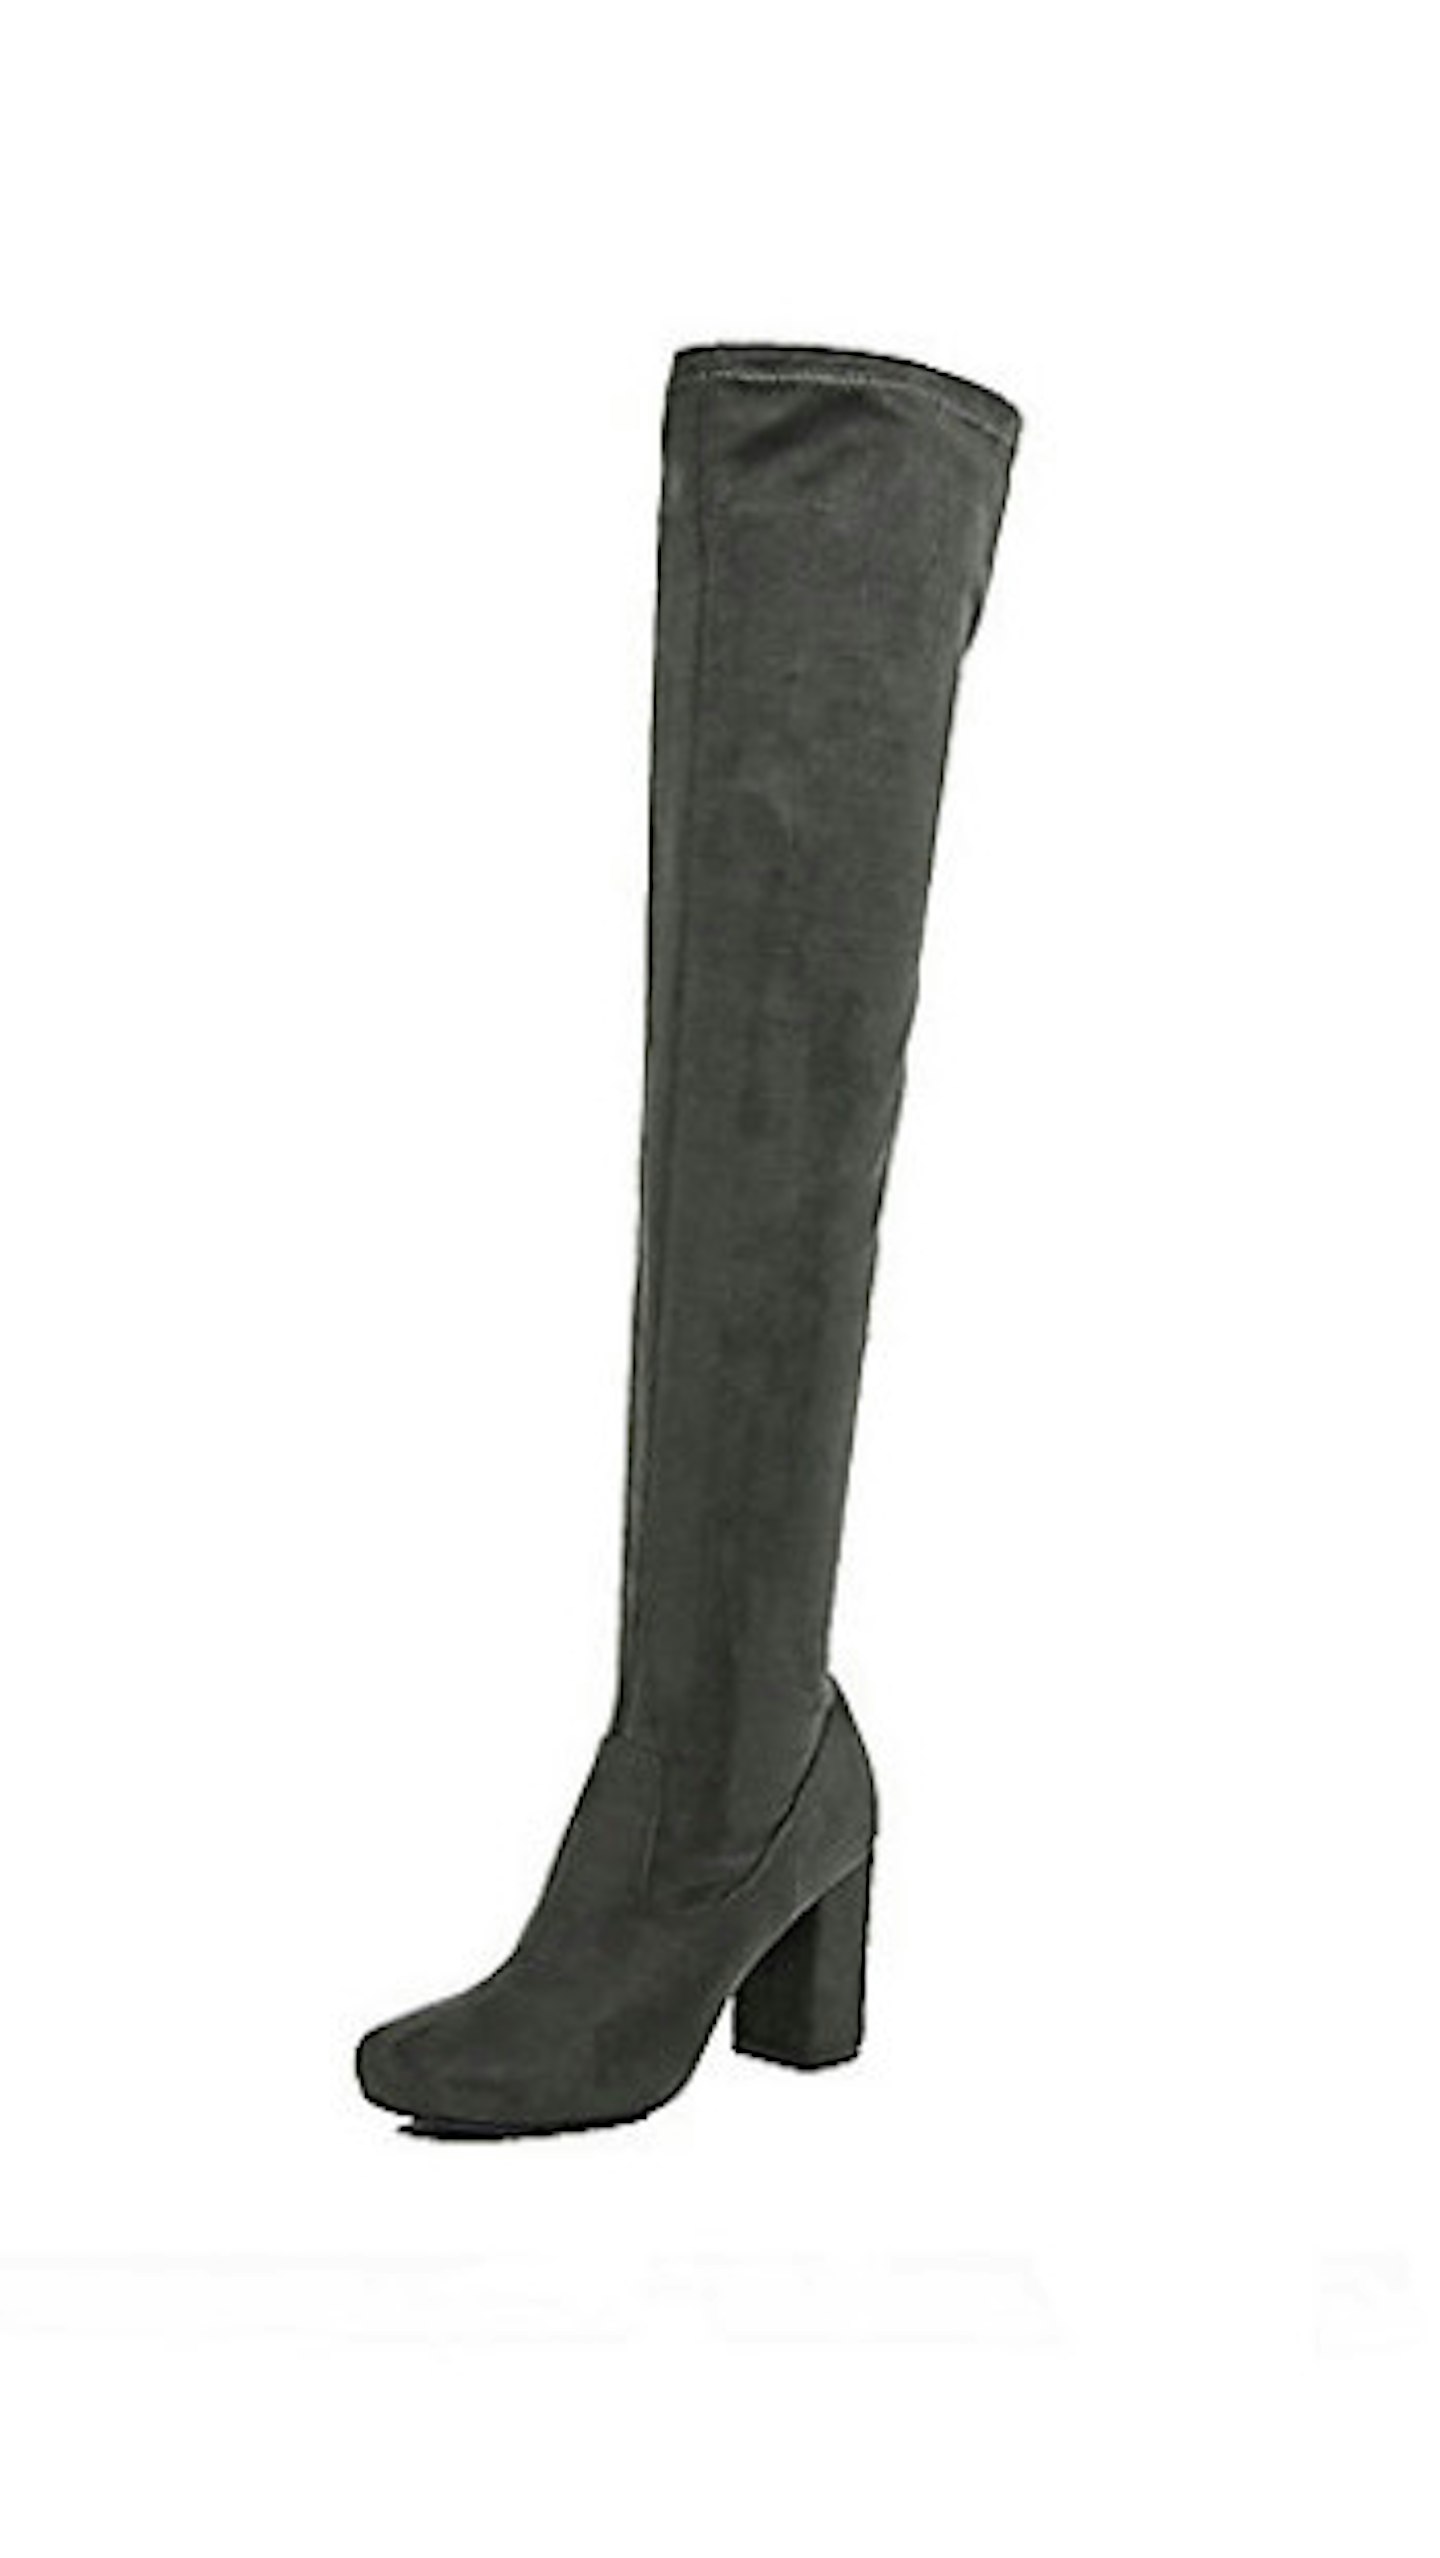 Grey faux suede over the knee boots, £75